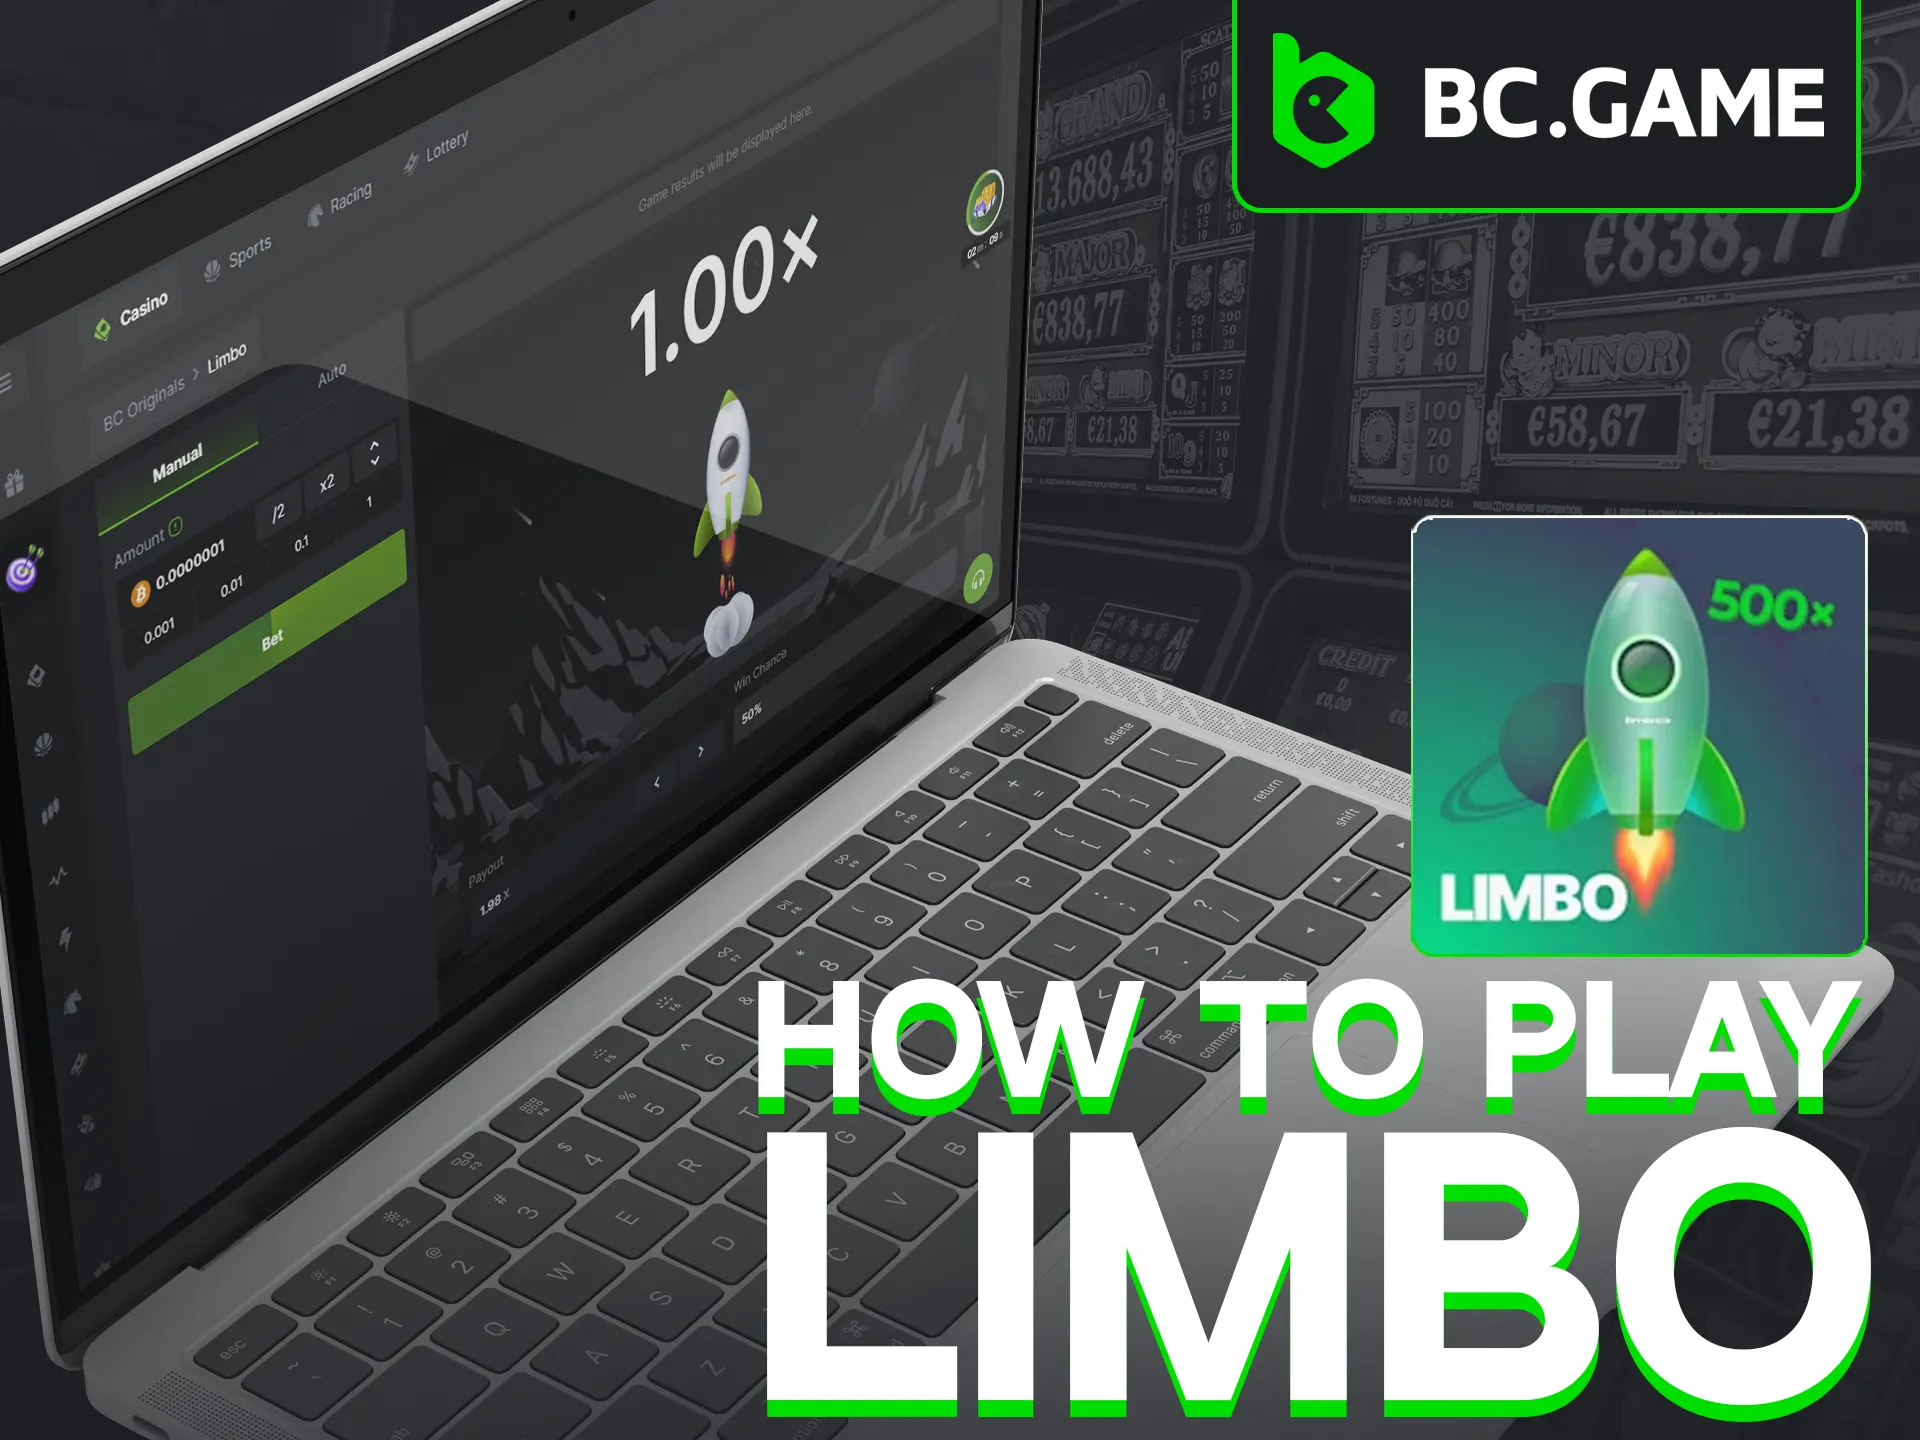 Play BC Game's Limbo, bet on increasing multipliers.